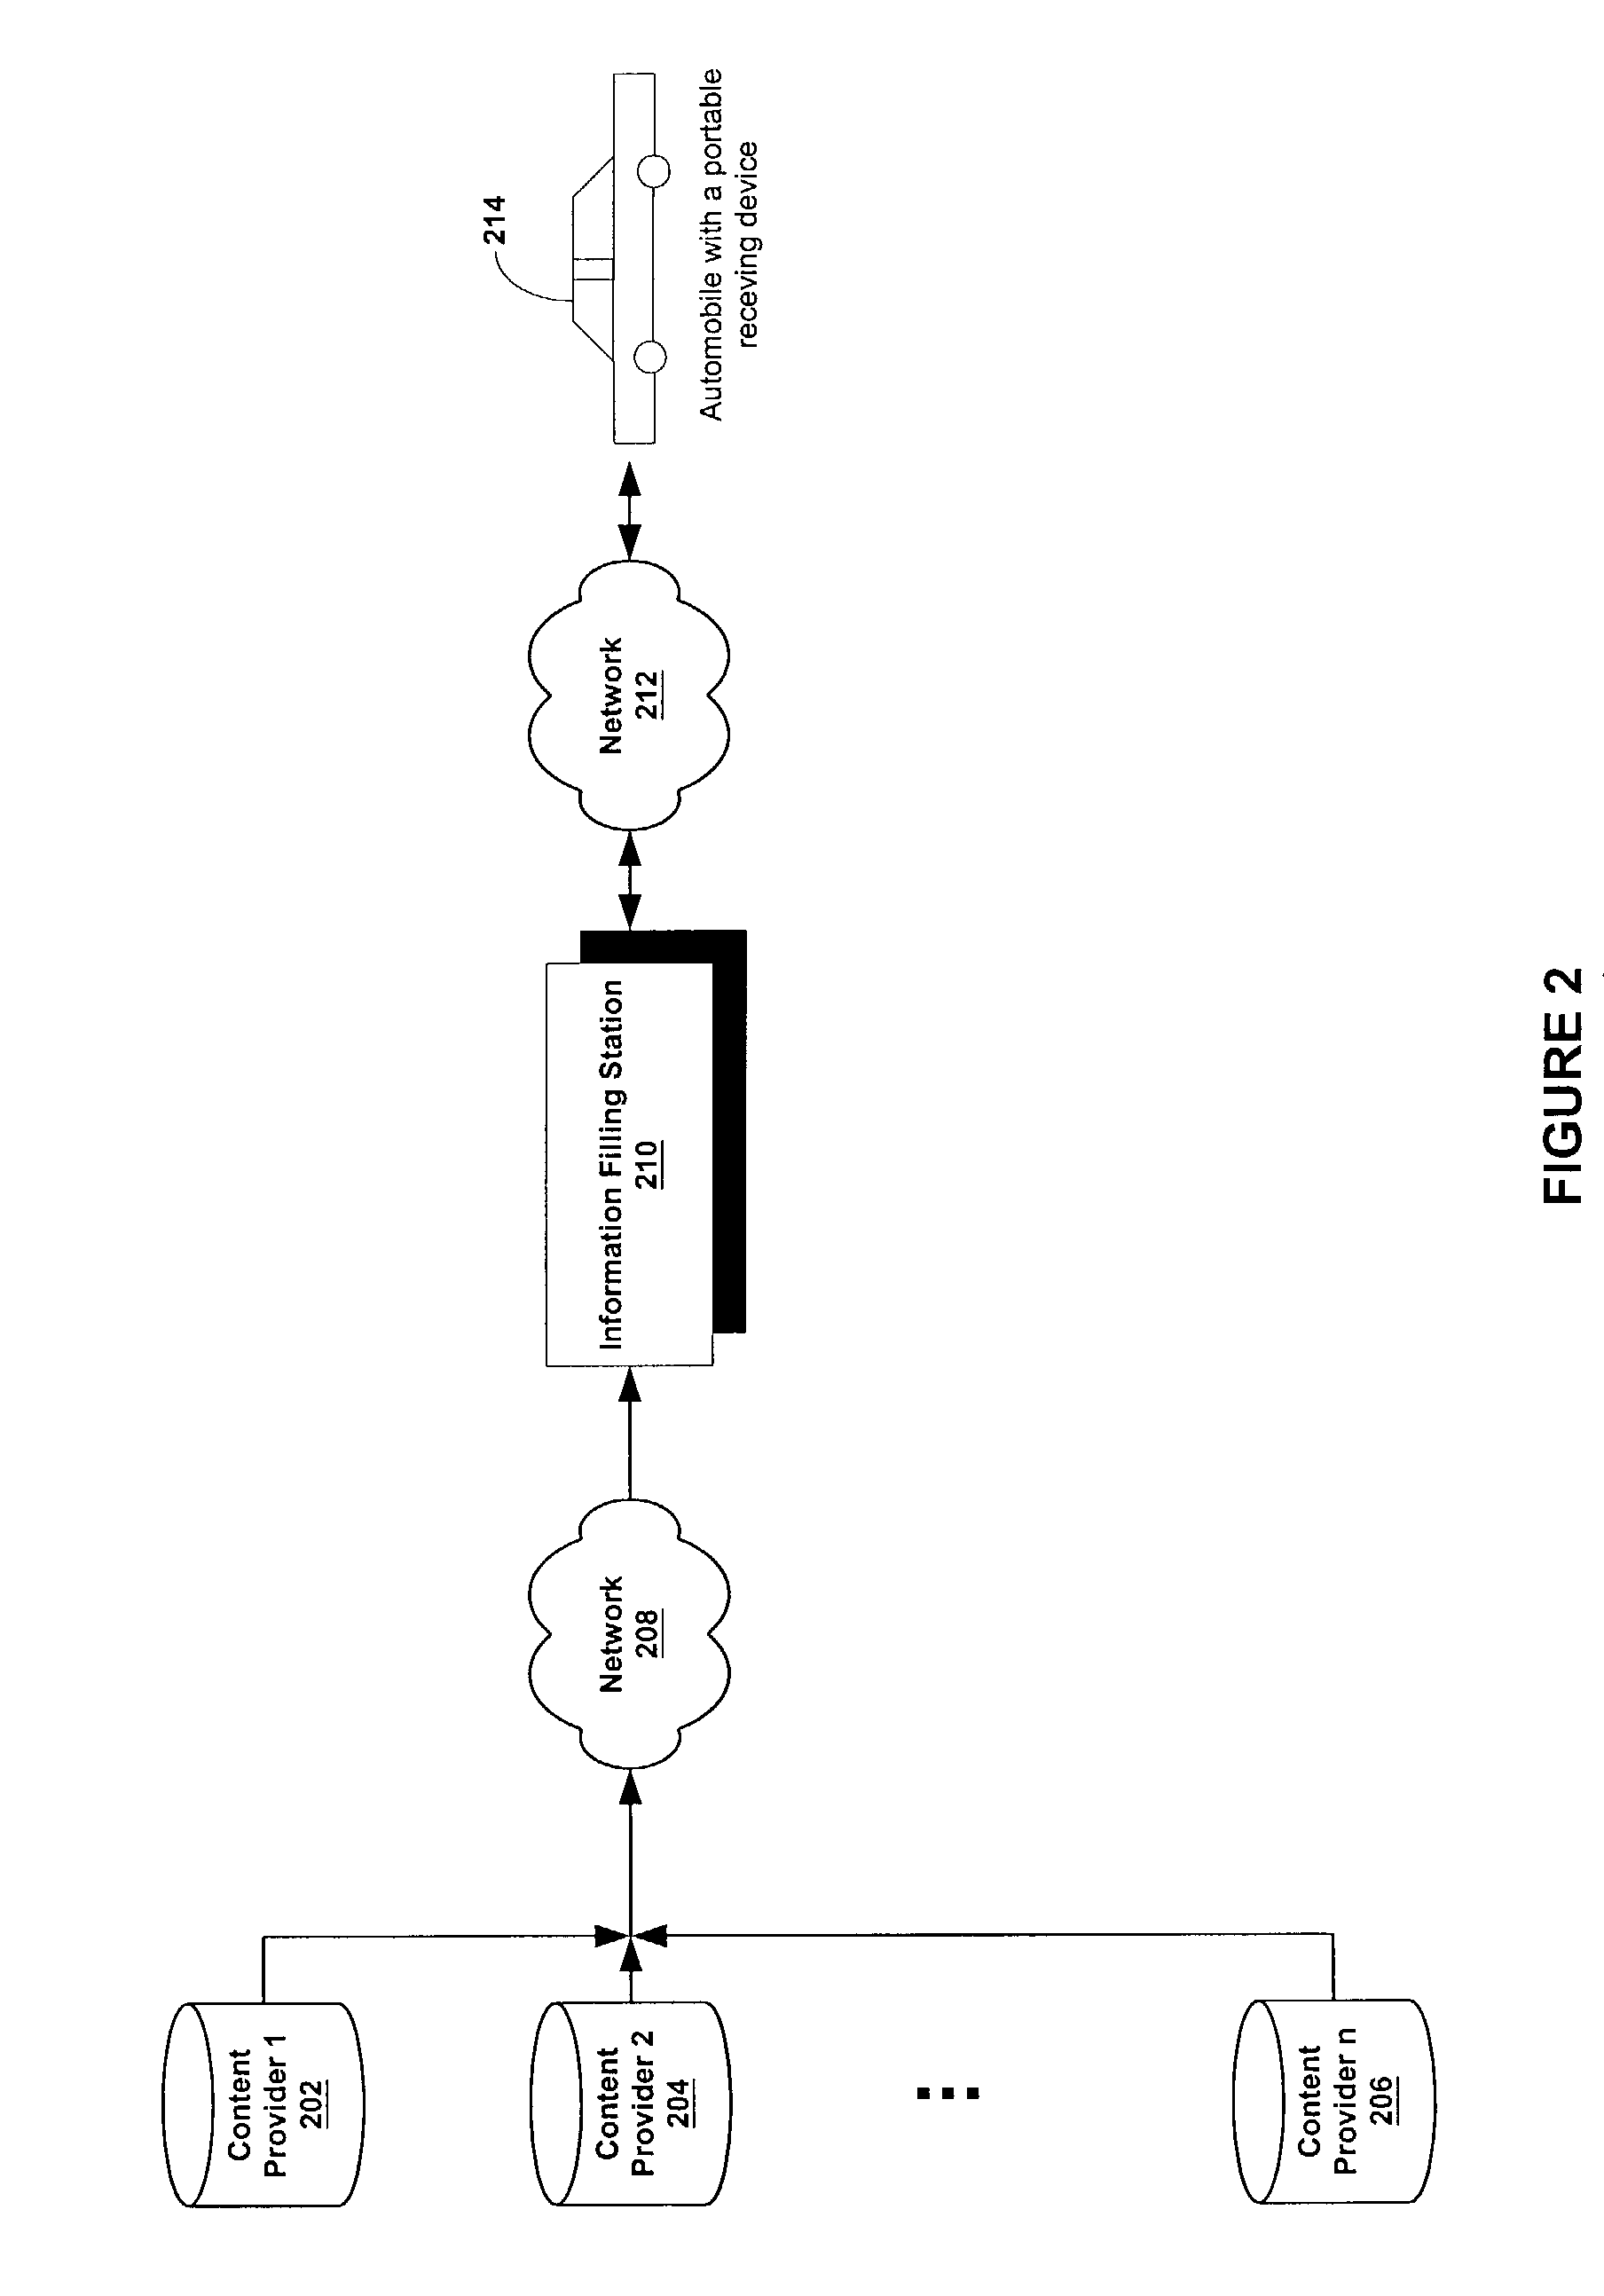 Information filling station facilitating wireless transfer of data content to a portable device or other pre-defined locations